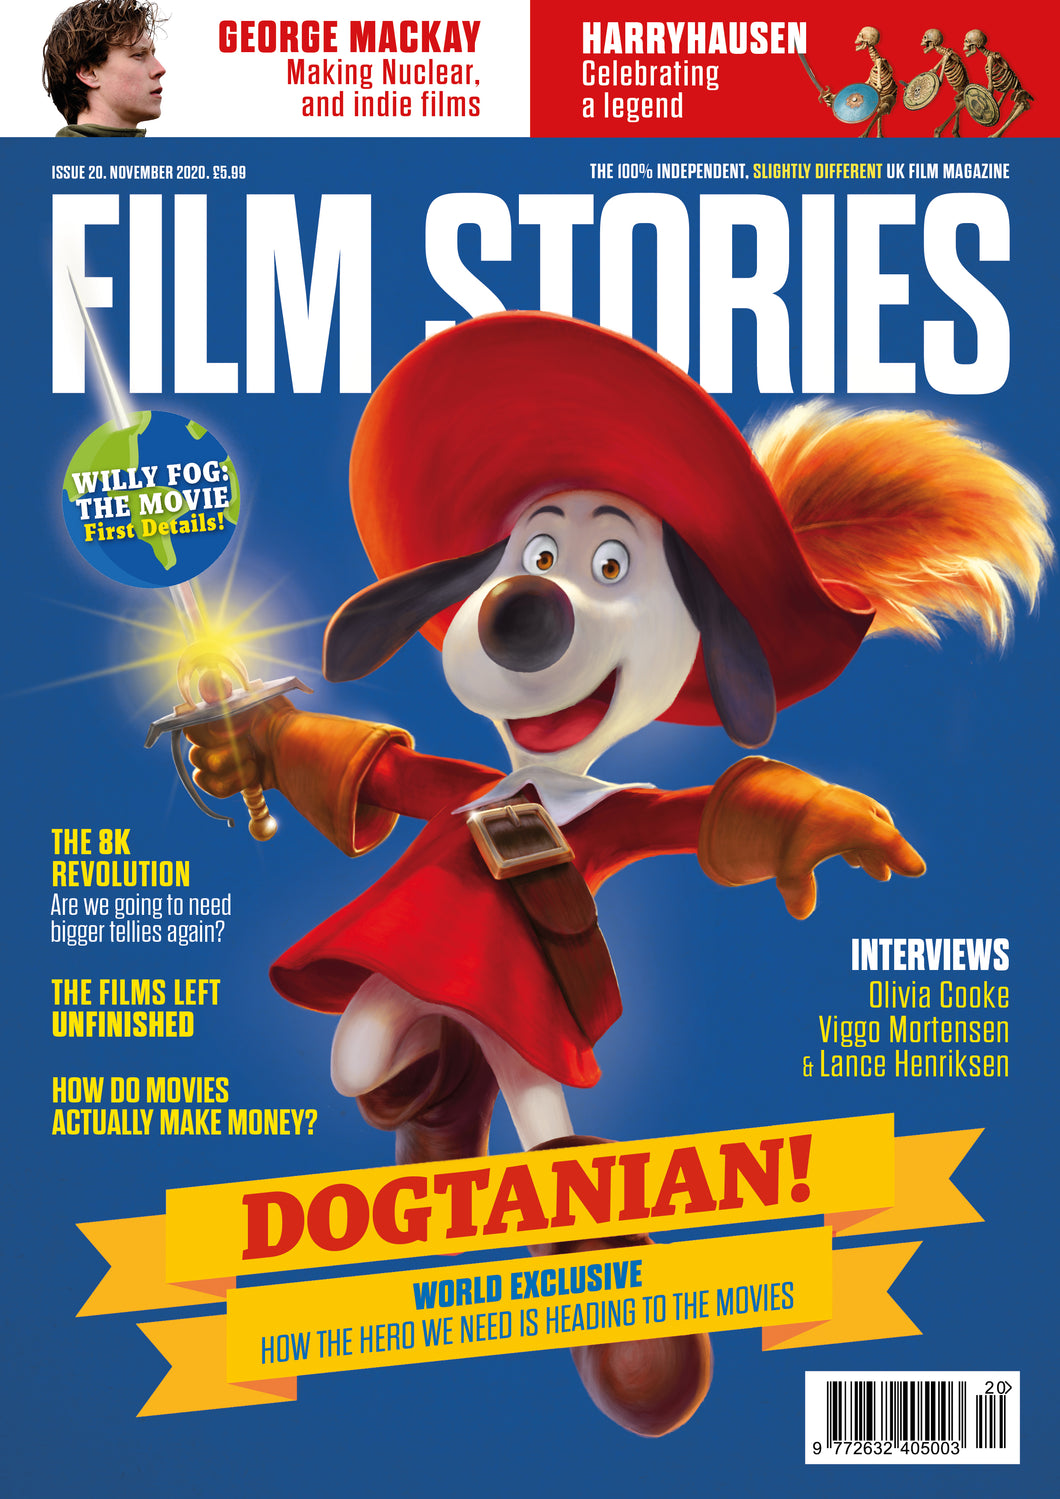 Film Stories issue 20 print edition (November 2020)